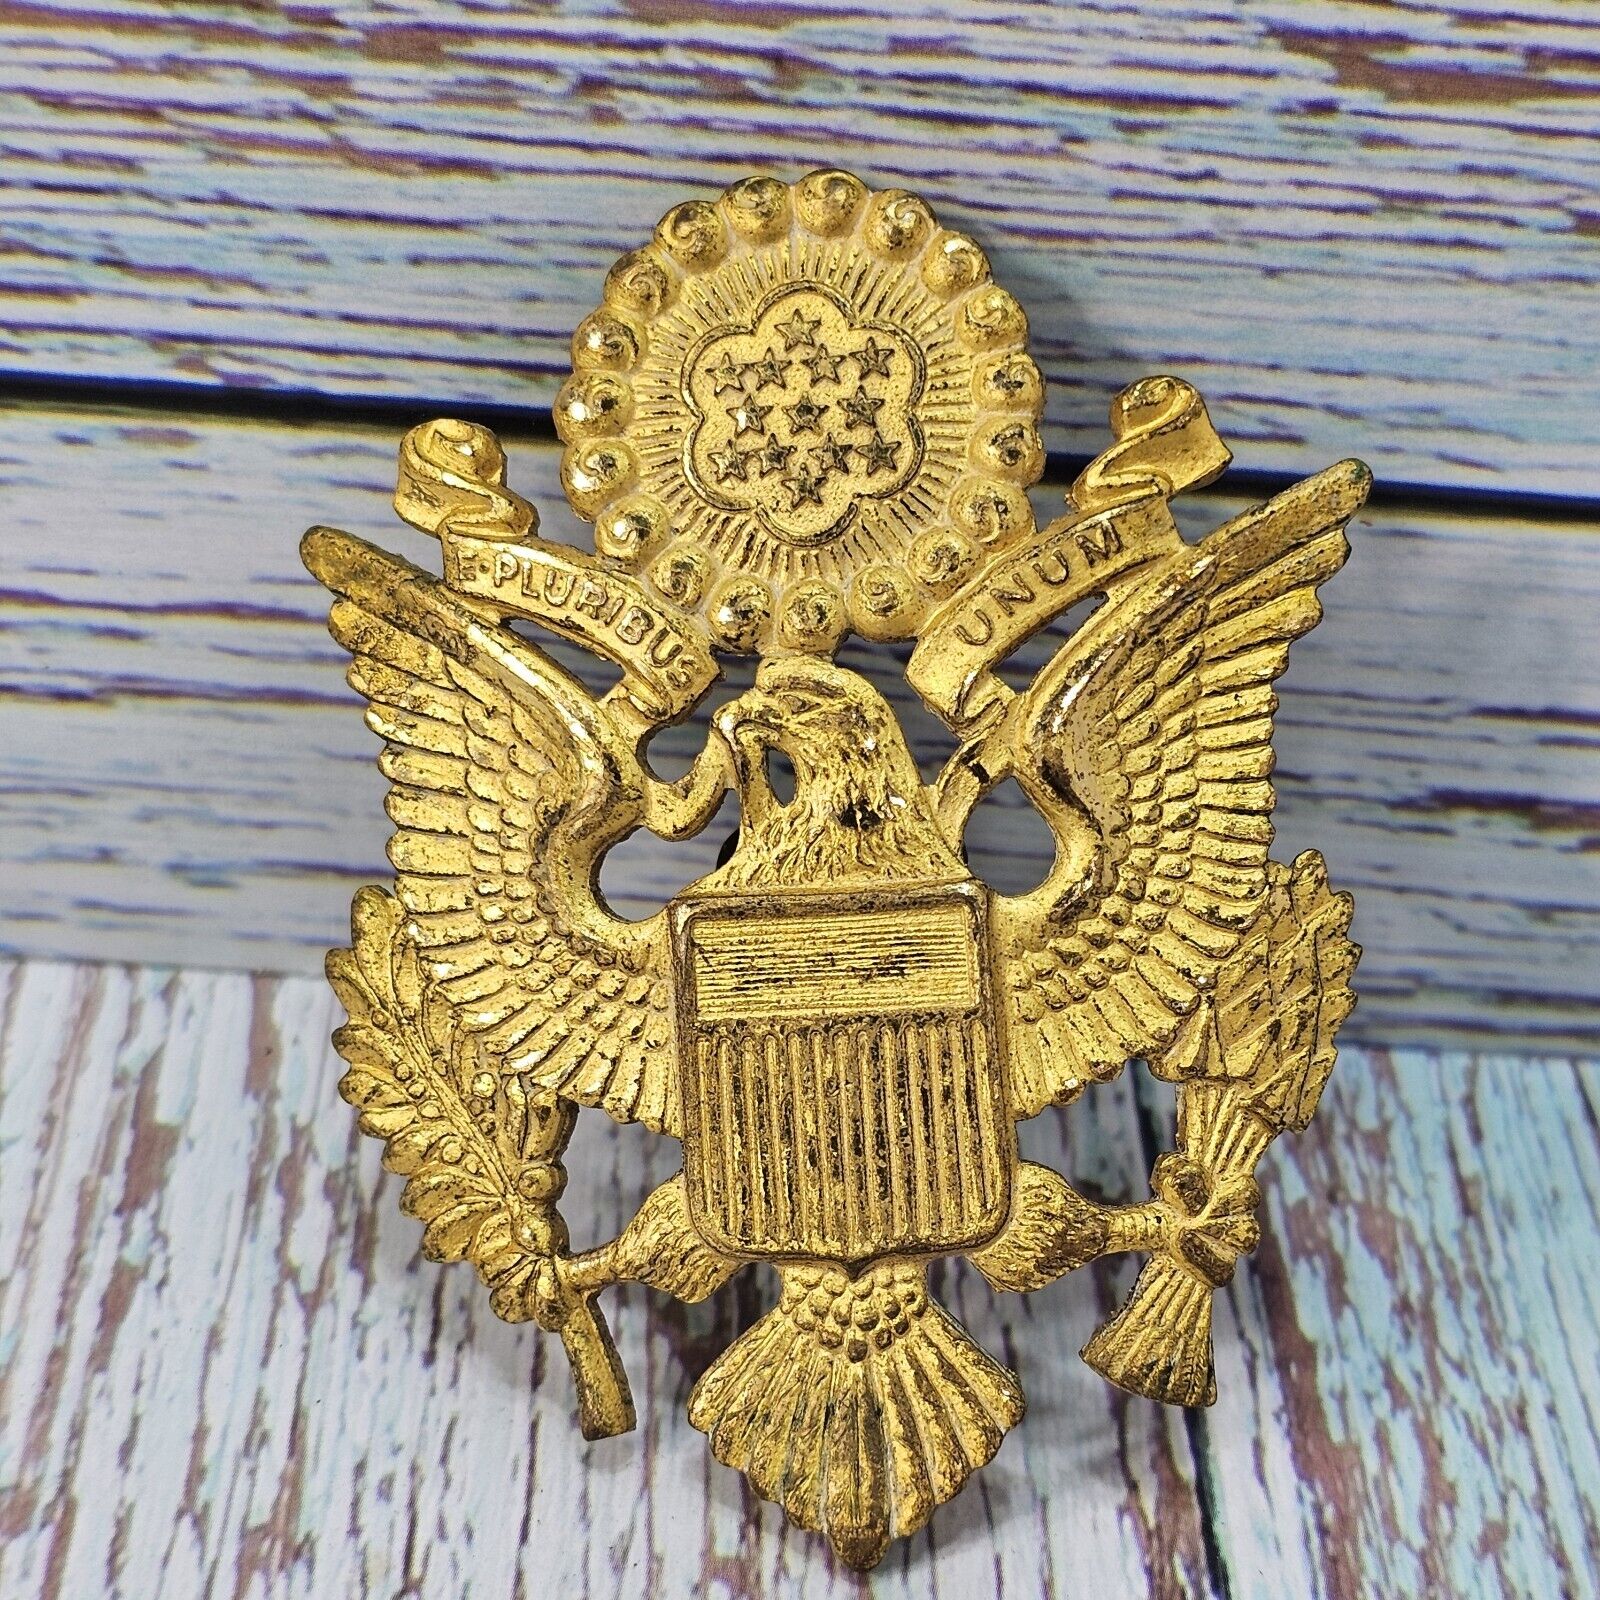 WWII WW2 Era US Army Officer Eagle Cap Hat Badge Military Screw Back Pin